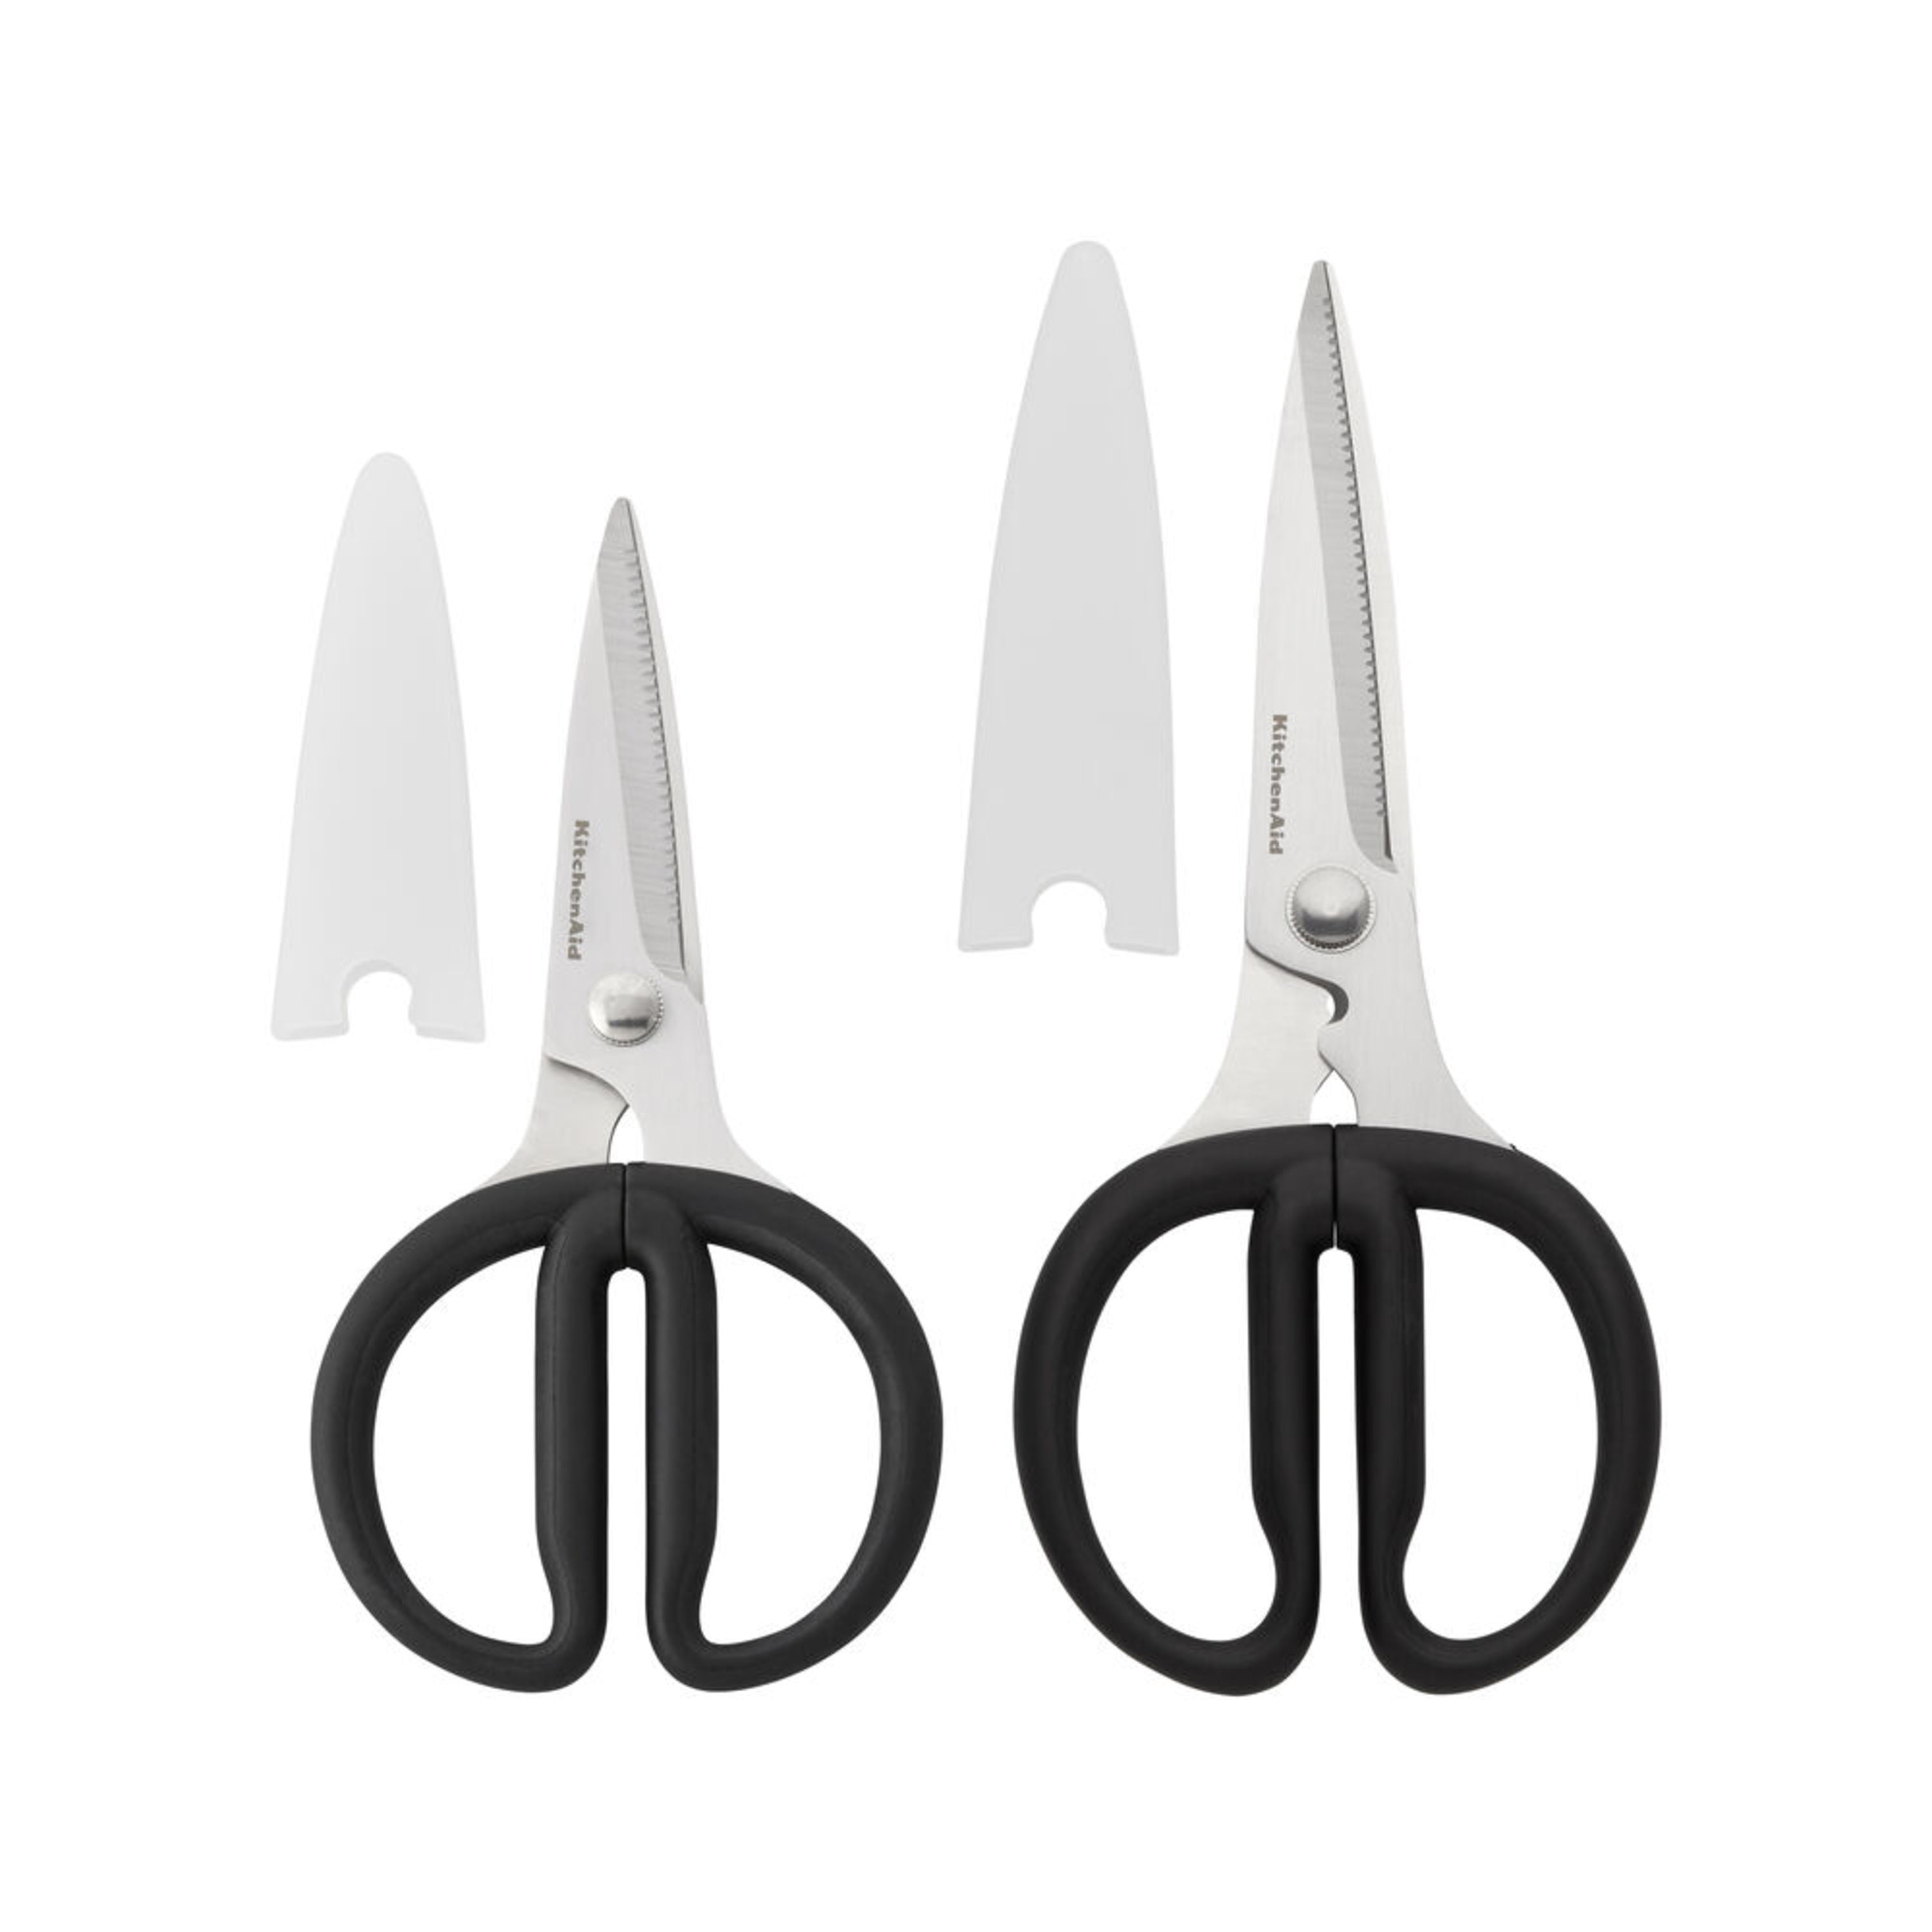 KitchenAid Universal Stainless Steel Shears Black Poultry